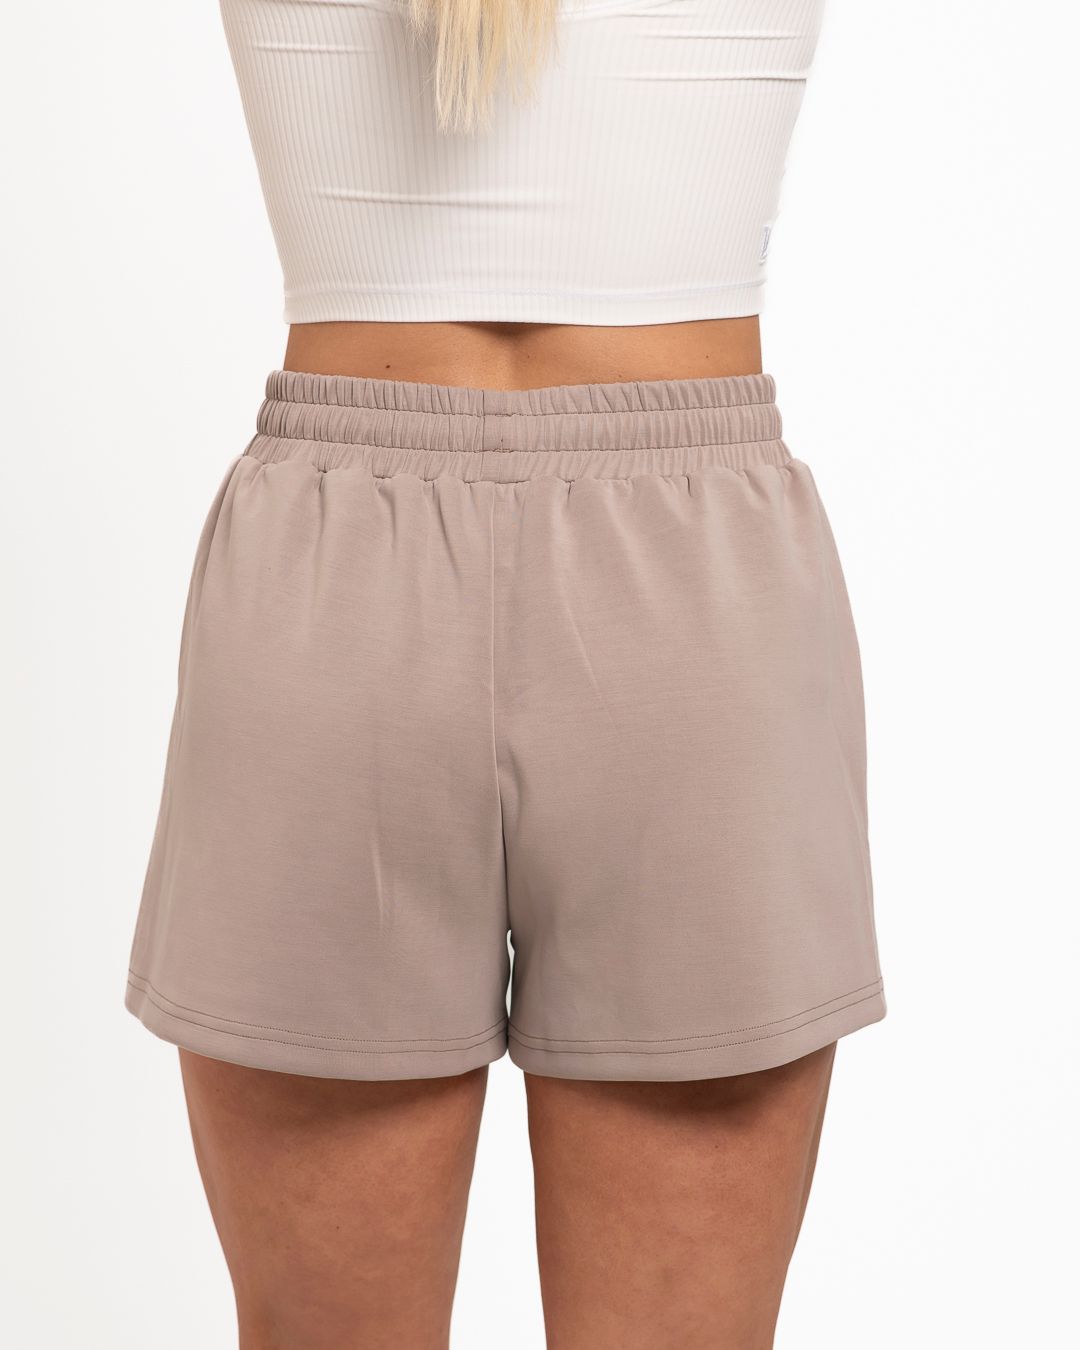 WOMEN'S On-The-Go Short (SoftMotion Fabric) - The Sydney Adams Collection